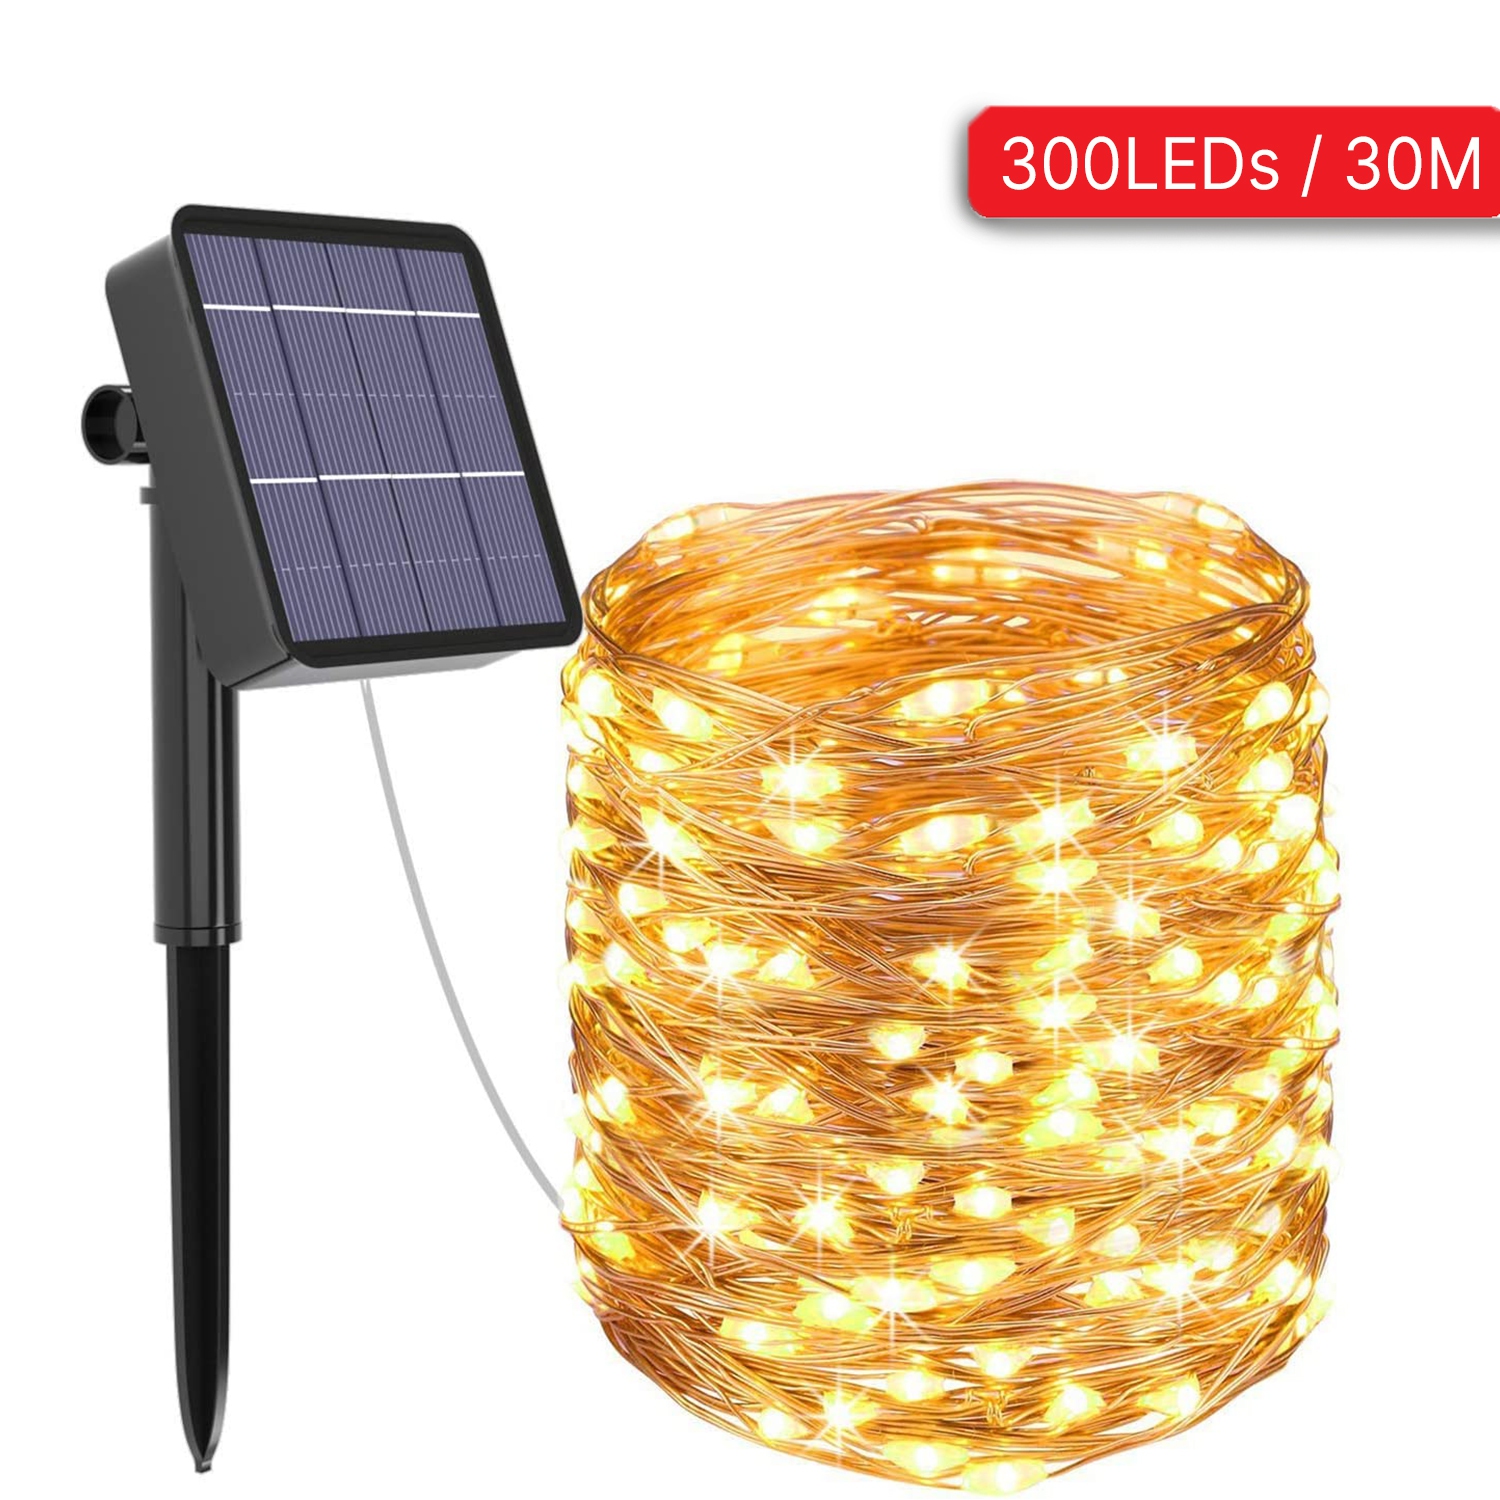 ISTAR Solar String Lights, 98.4Feet 300 Led Solar Powered Fairy Lights with 8 Lighting Modes Waterproof Decoration Copper Wire Lights for Patio Yard Trees Christmas Wedding Party (Warm White)